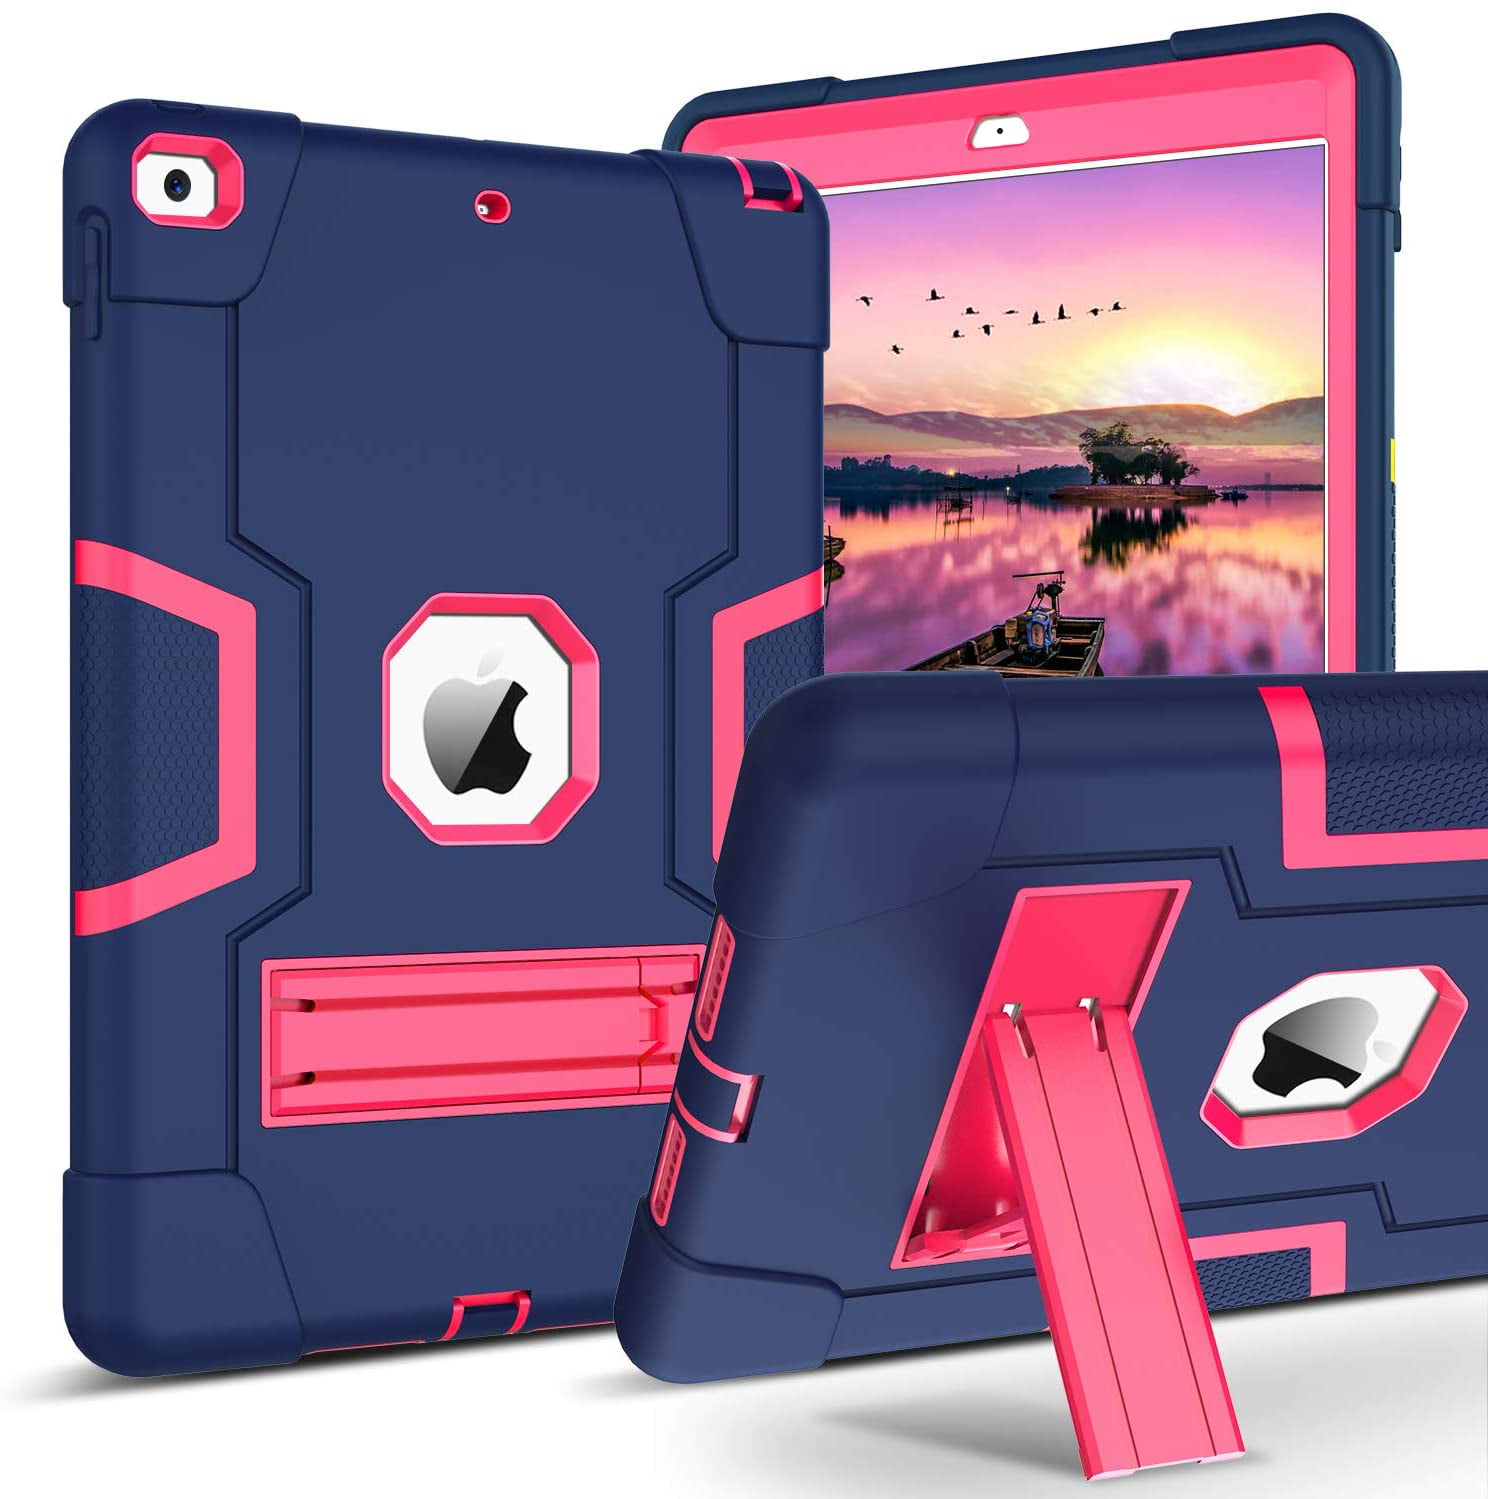 iPad 7th Generation Case iPad 10.2 2019 Case, Black ,Kickstand Heavy Duty 3 in 1 High Impact Full-Body Rugged Bumper Shockproof Protective Anti-Scratch Tablet Case for iPad 10.2 Inch 2019, Model No A2197/A2198/A2200